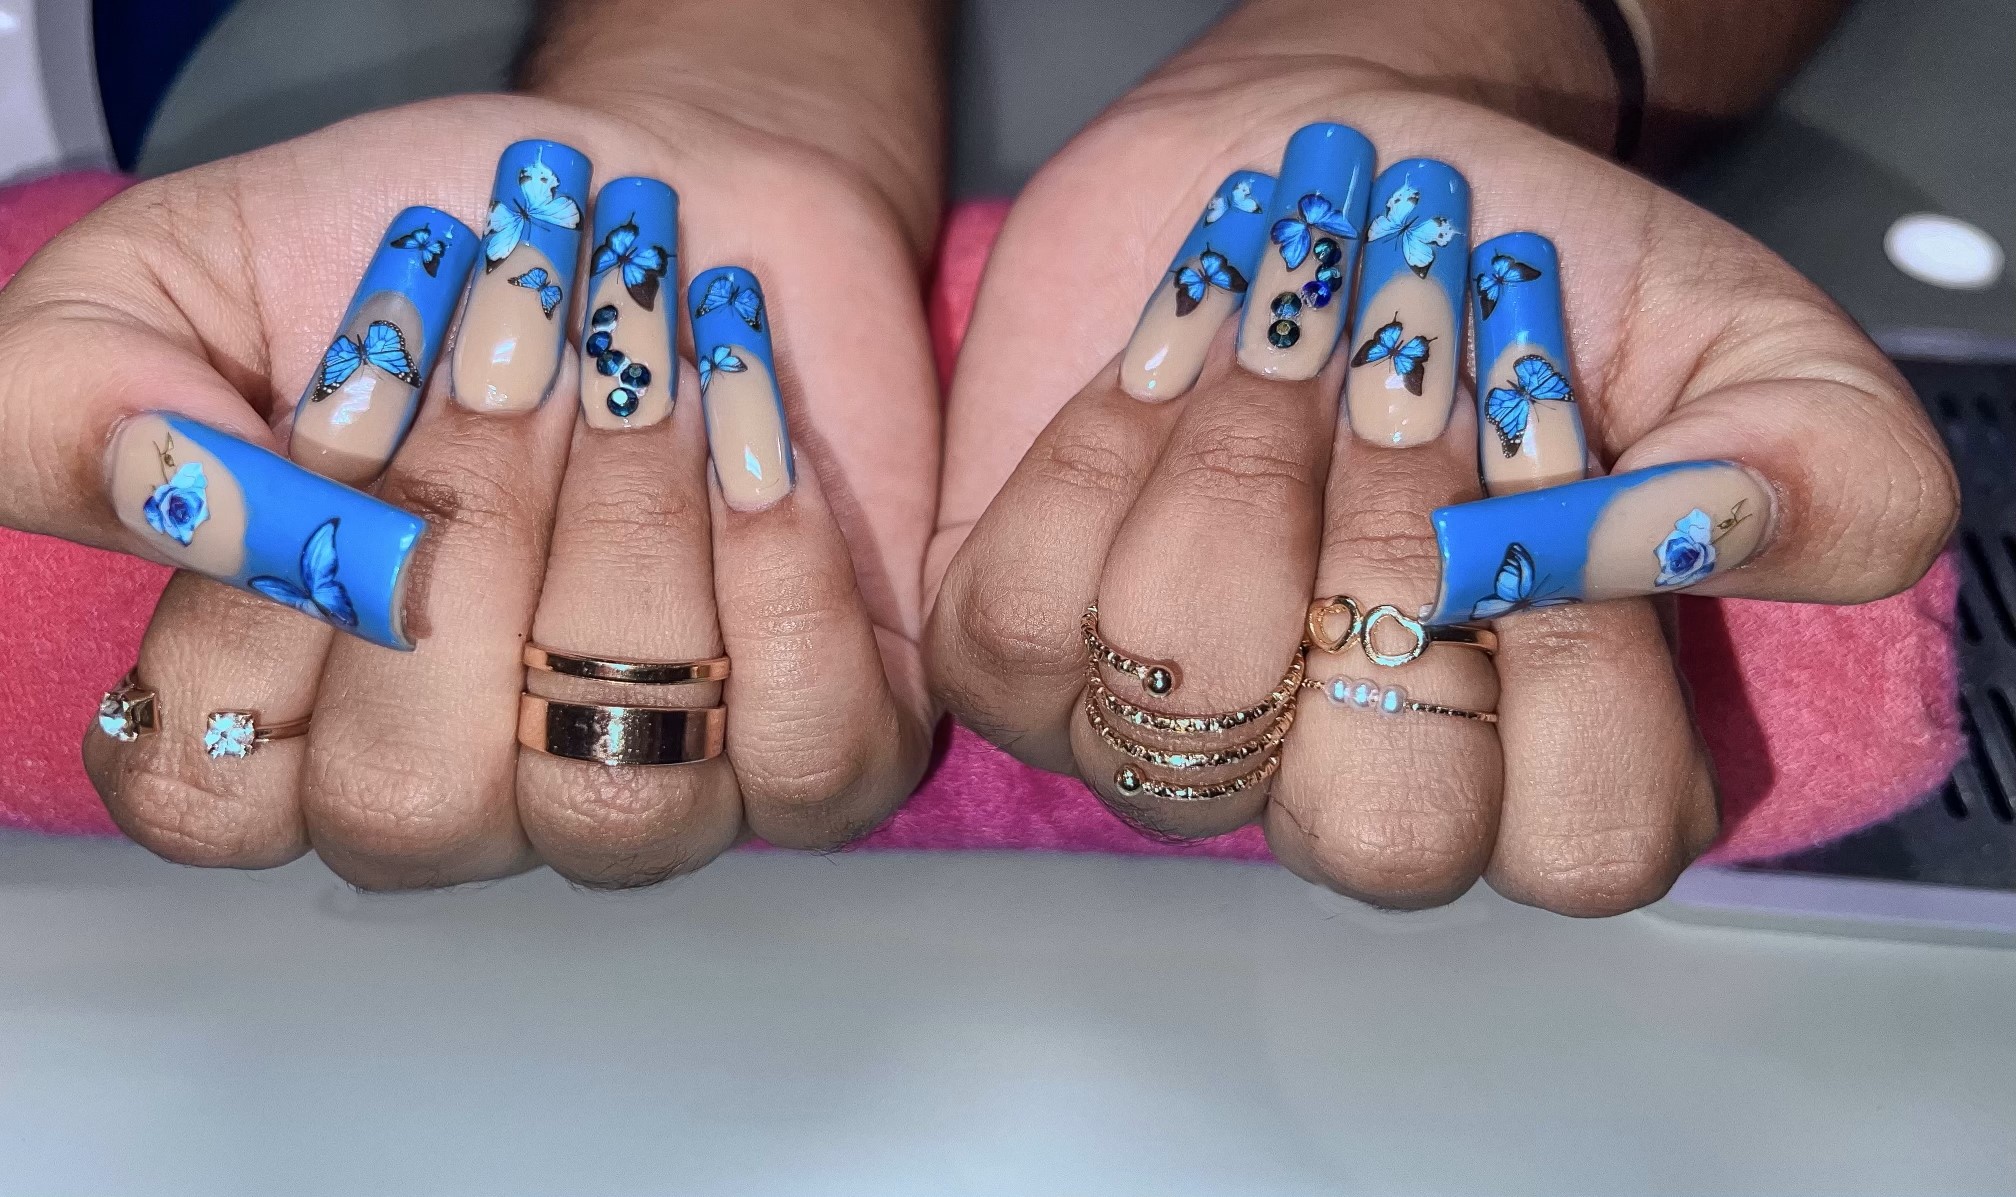 If you are looking for beautiful and long-lasting acrylic nails Belleza Latina Lashes and Salon can help. We are a collective of artists, stylists, and beauty technicians who will make sure your acrylic nails look beautiful.